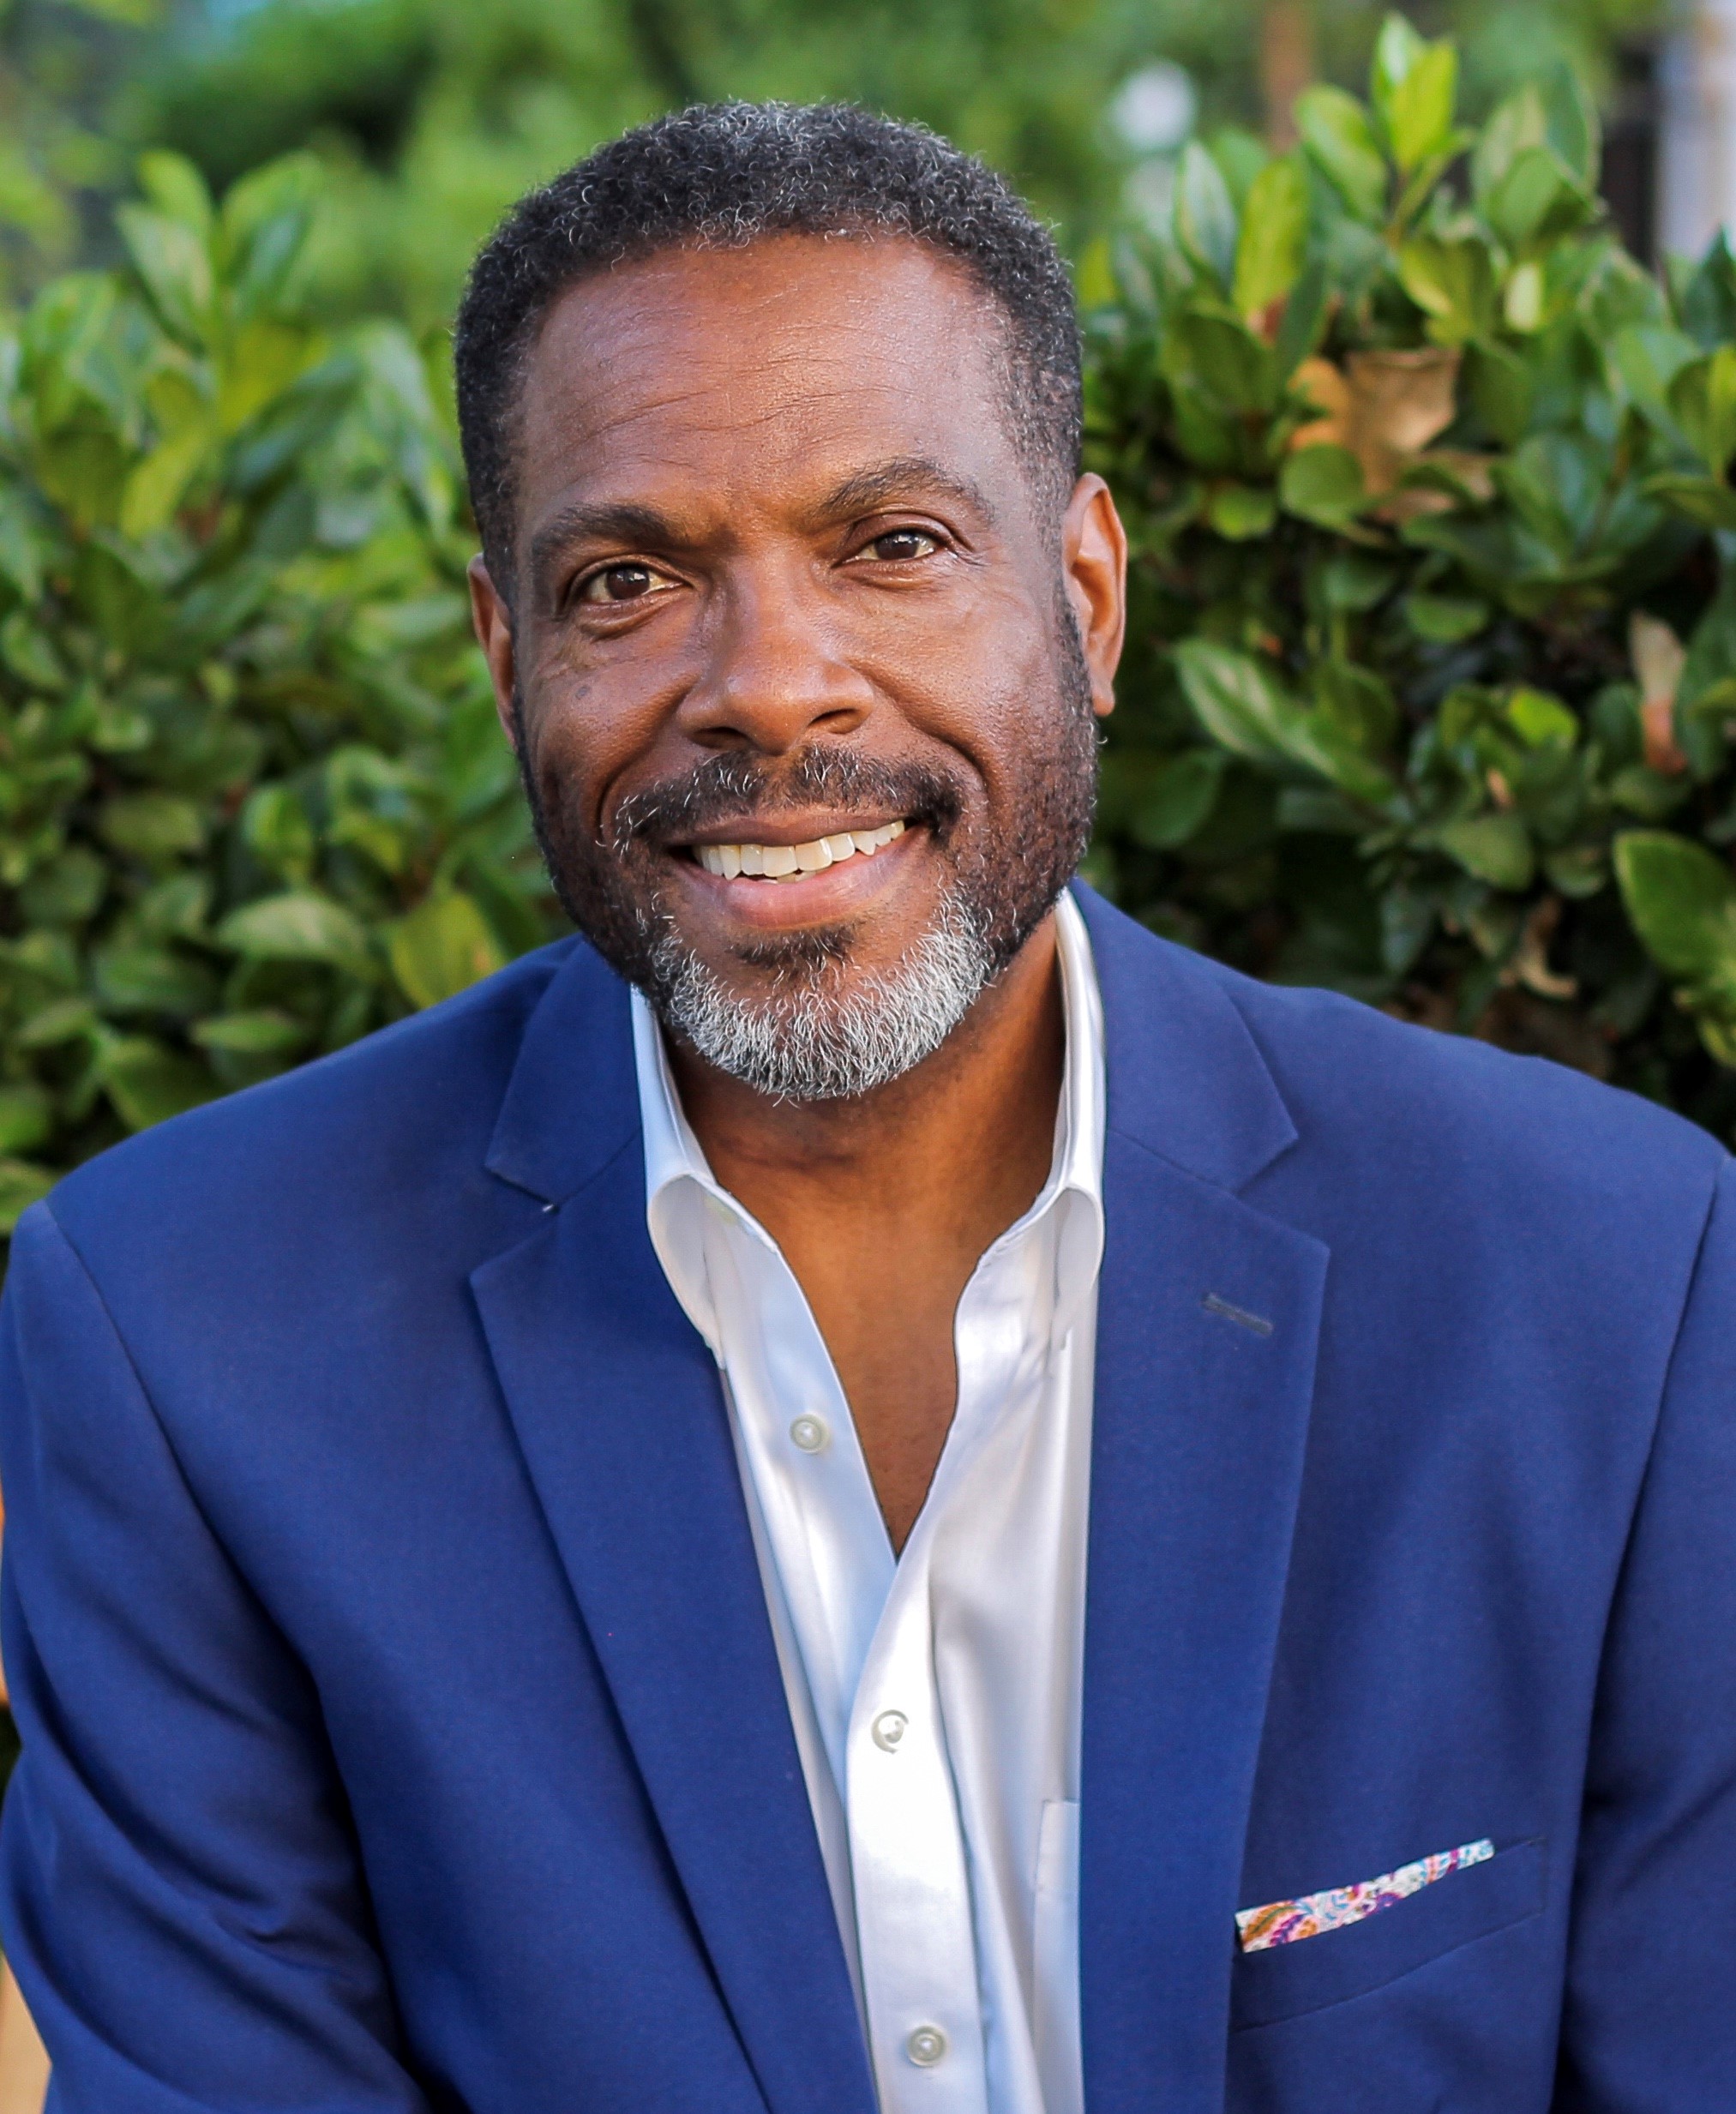 Cosby Show' Actor Joseph C. Phillips Tapped To Be A Professor At Clark  Atlanta University, News